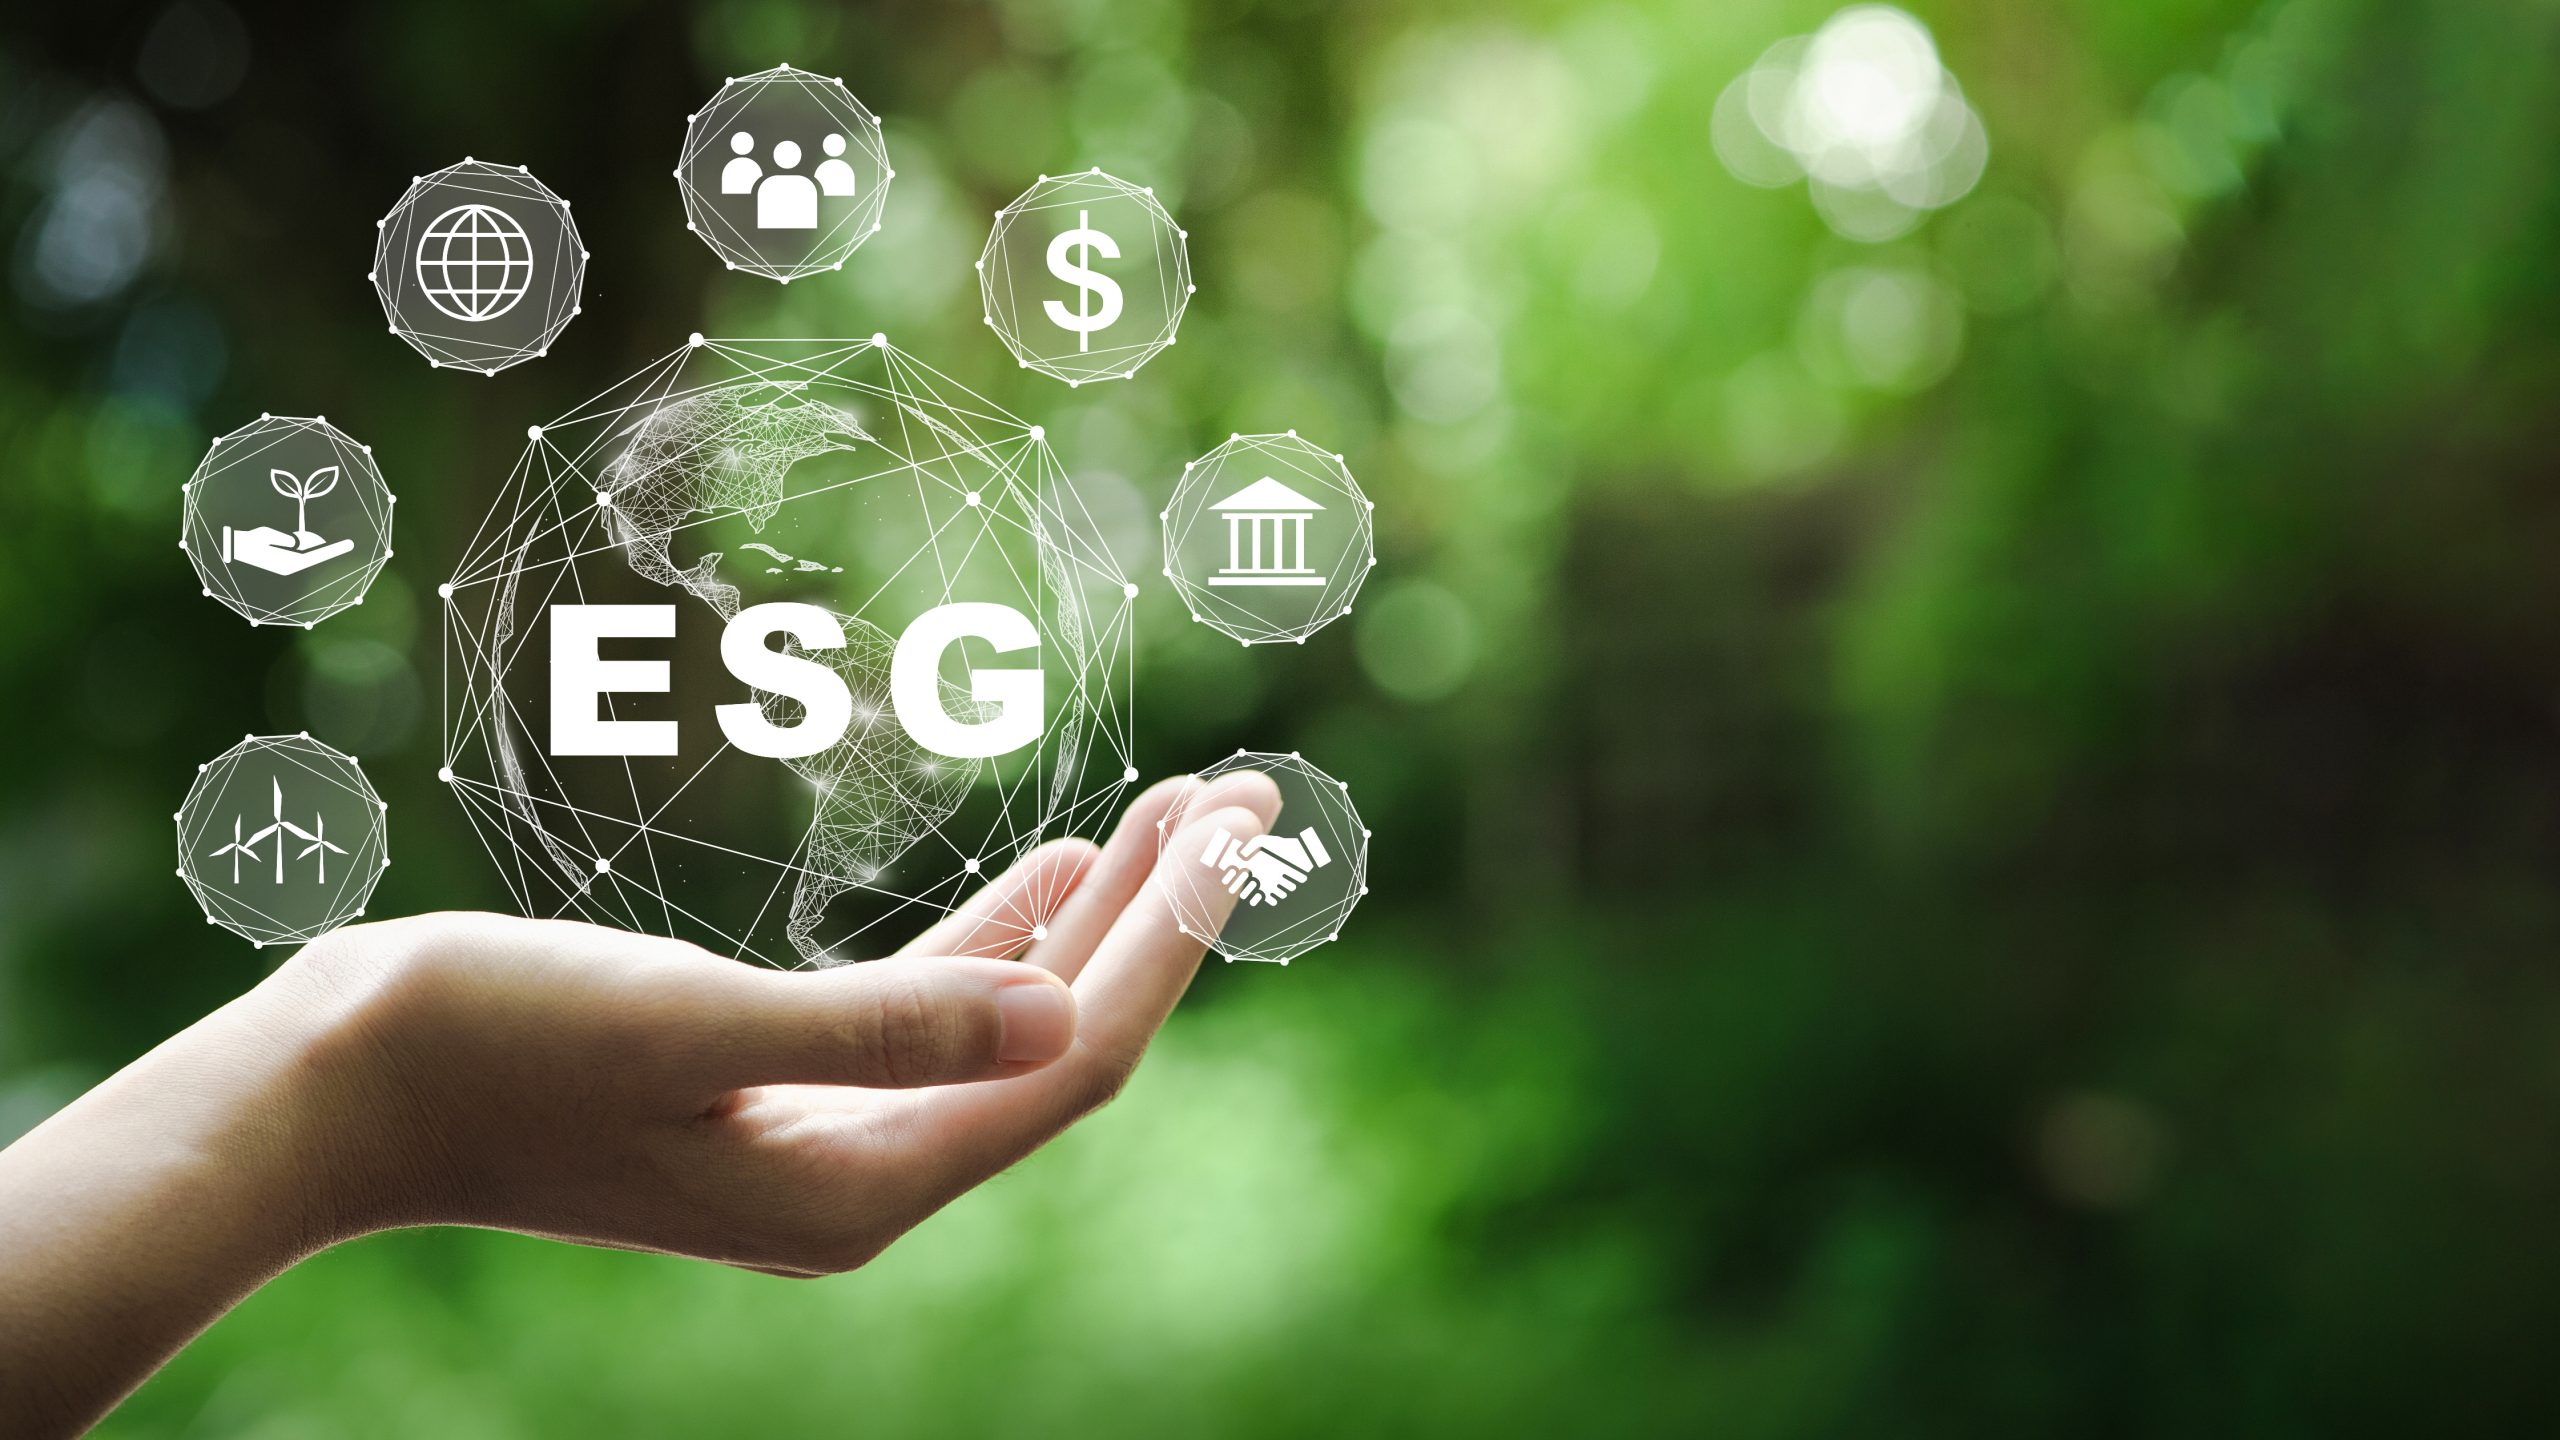 Read more about the article ESG – Environment, Social & Governance.